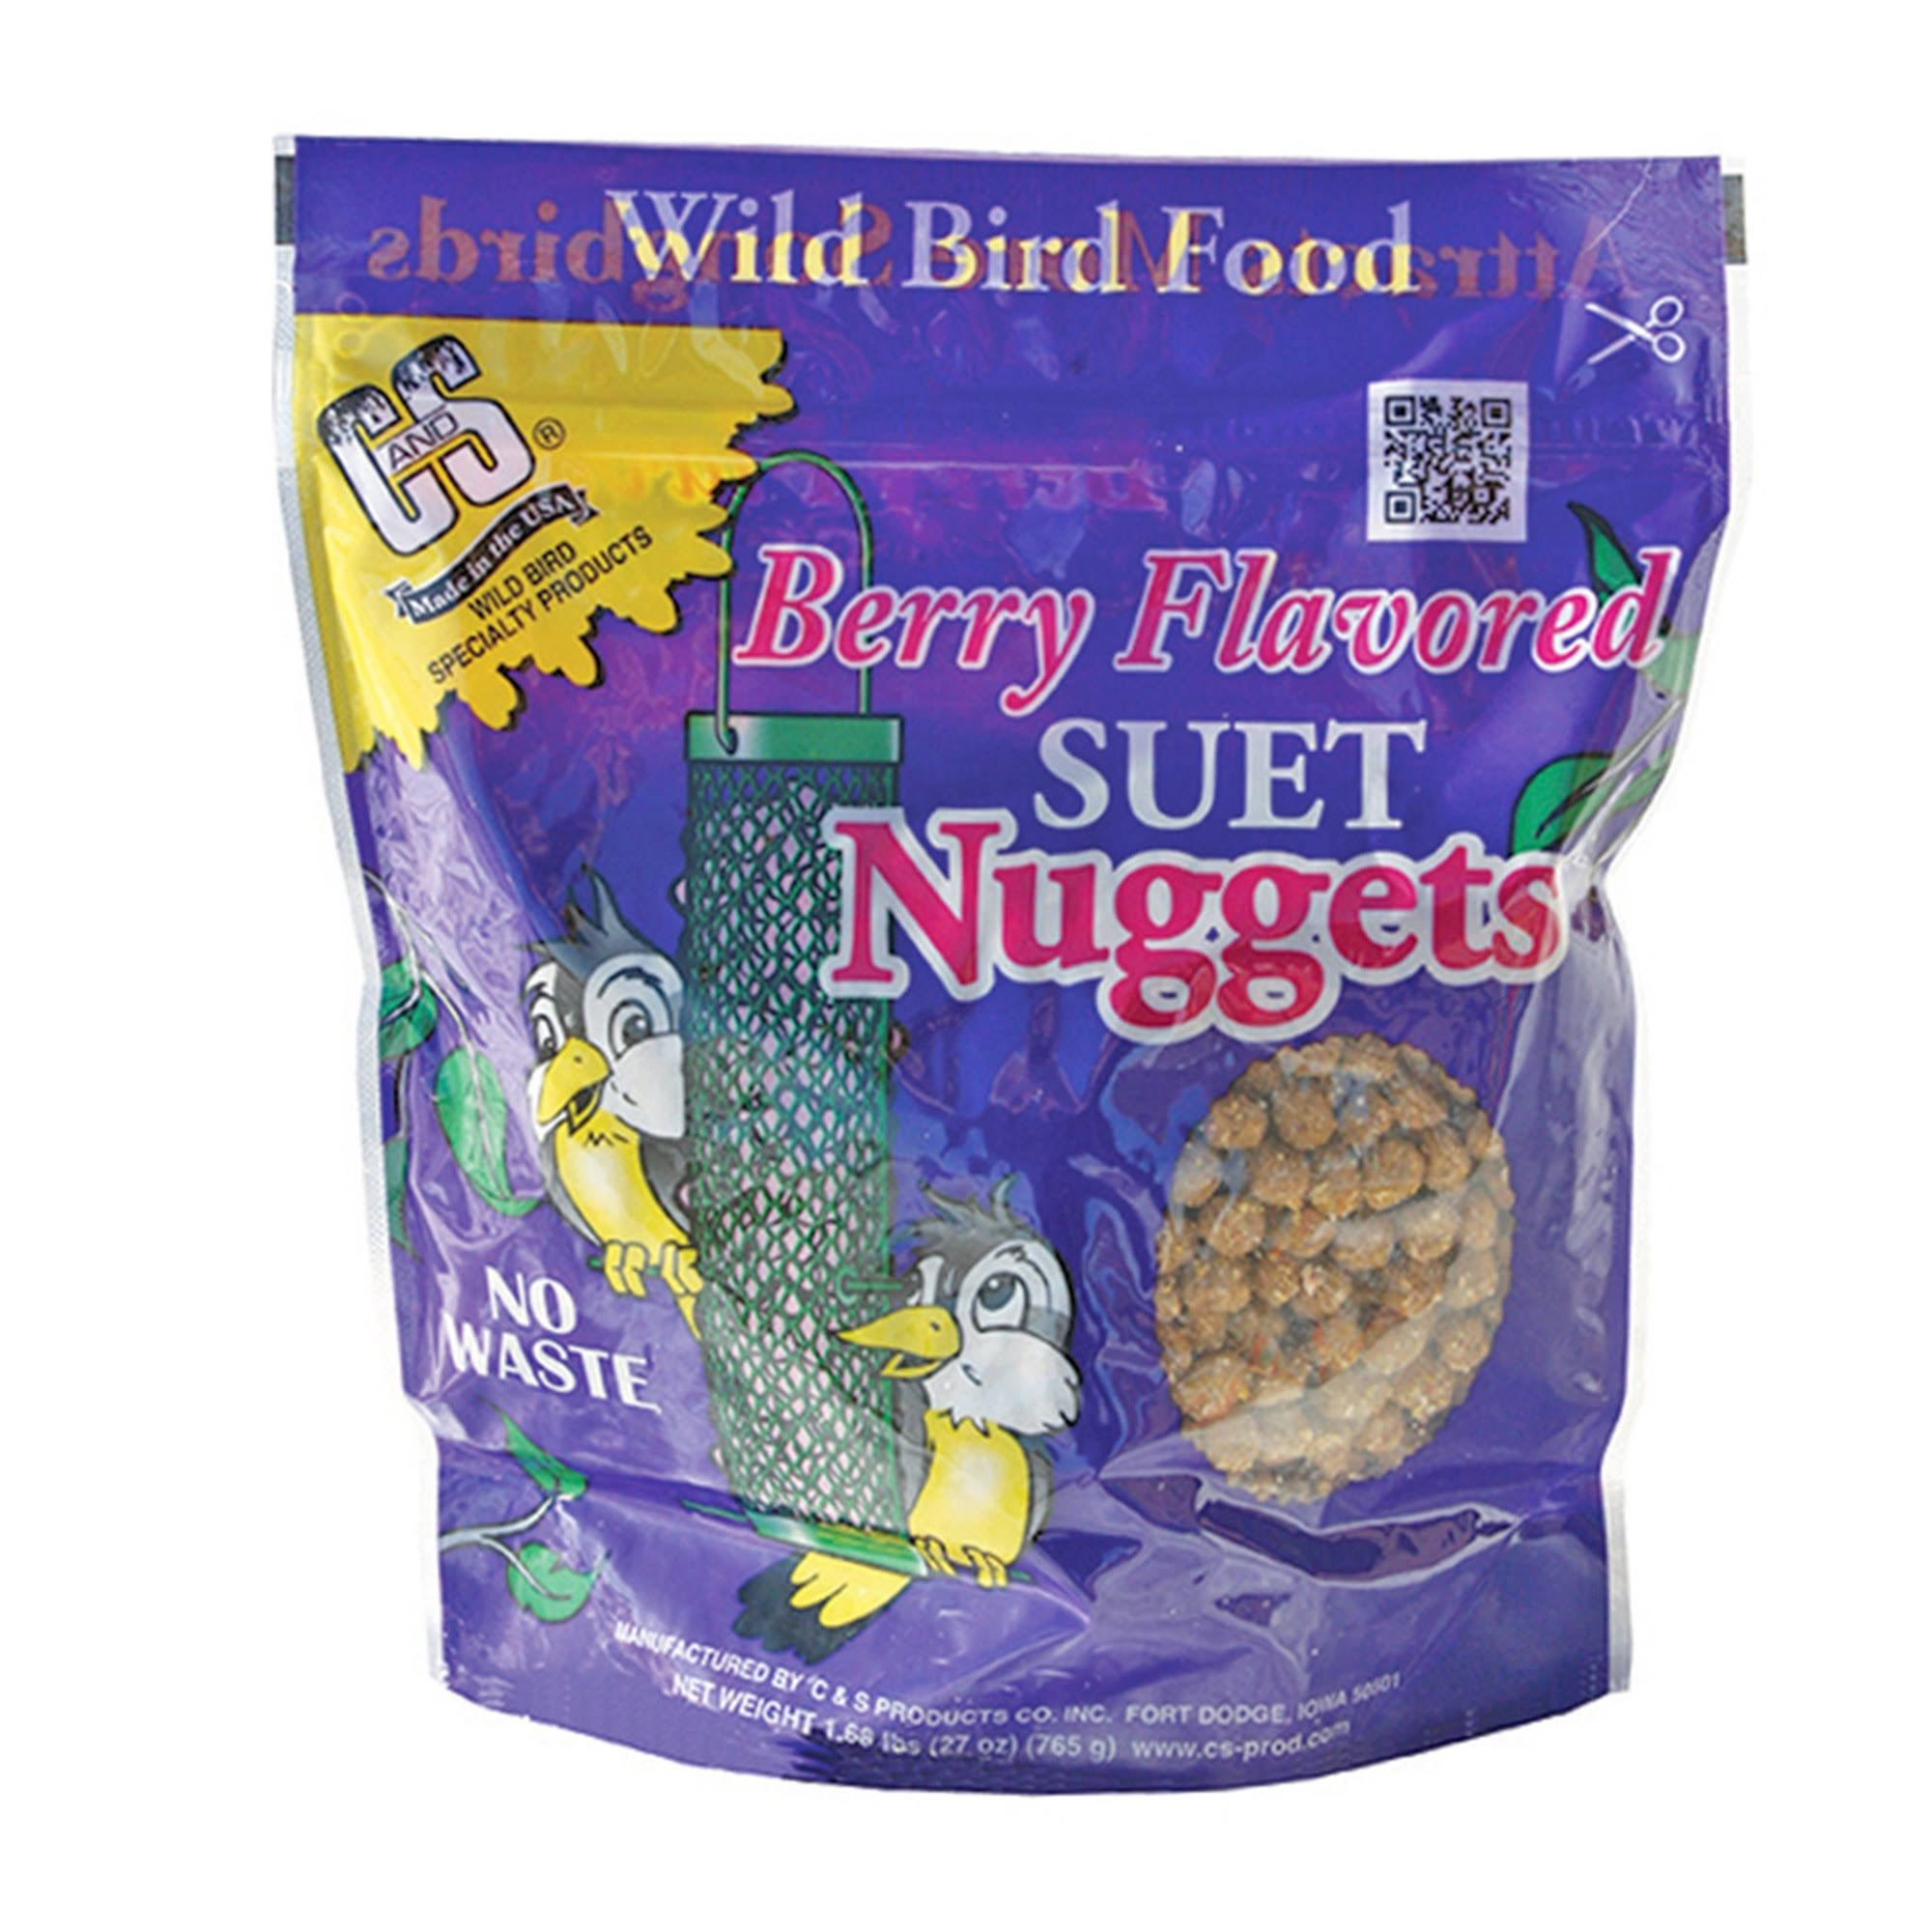 C &S Products Suet Nuggets - Berry, 27oz